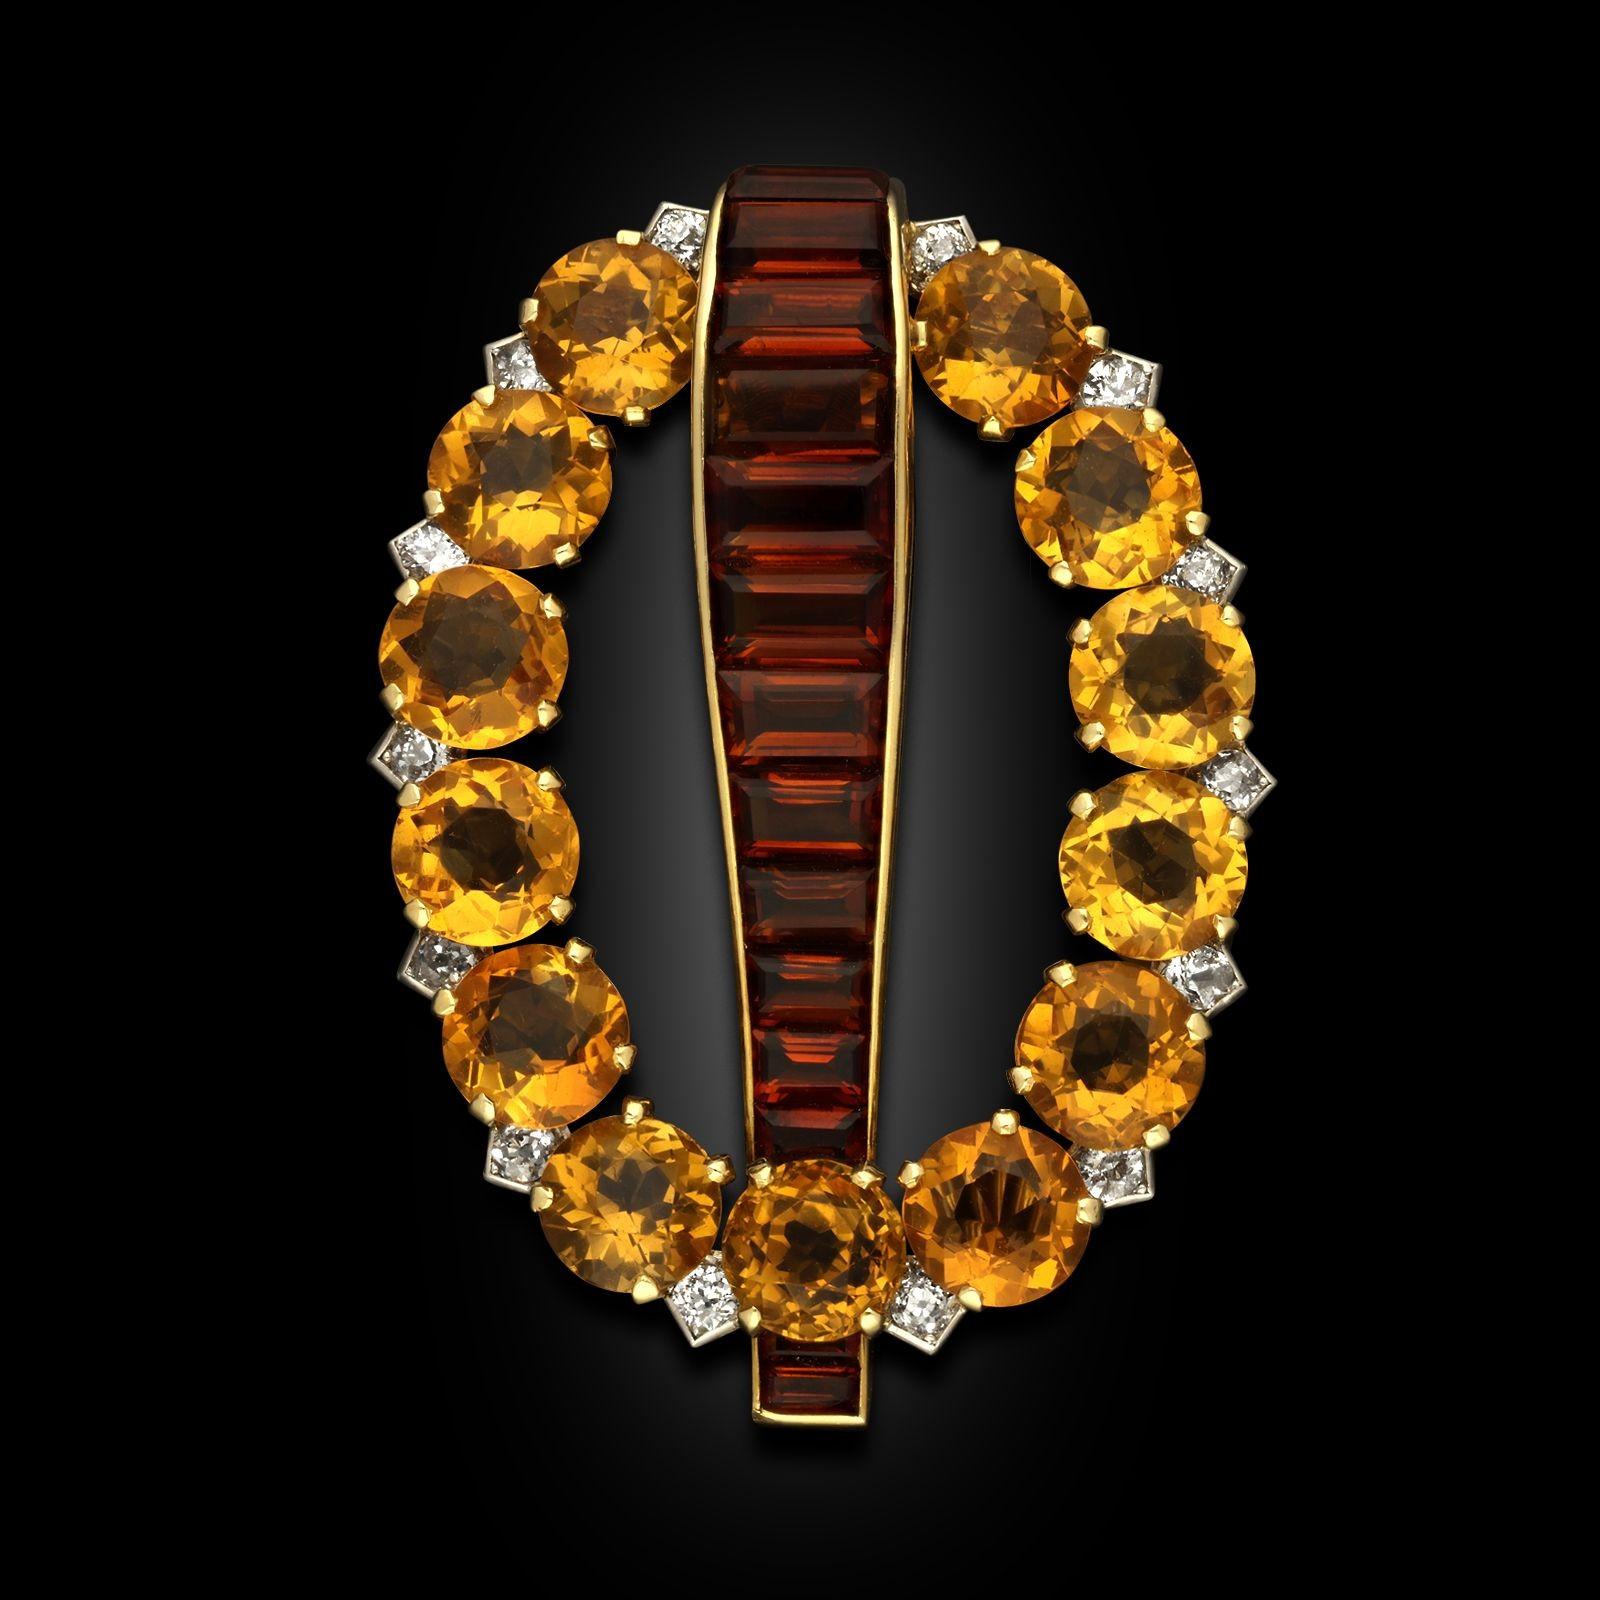 An Art Deco citrine brooch by Cartier, circa 1930. The brooch is designed as an oval of golden round cut citrines interspersed with white old cut diamonds. A tapering line of channel set calibrated madeira citrines goes down the centre. The reverse